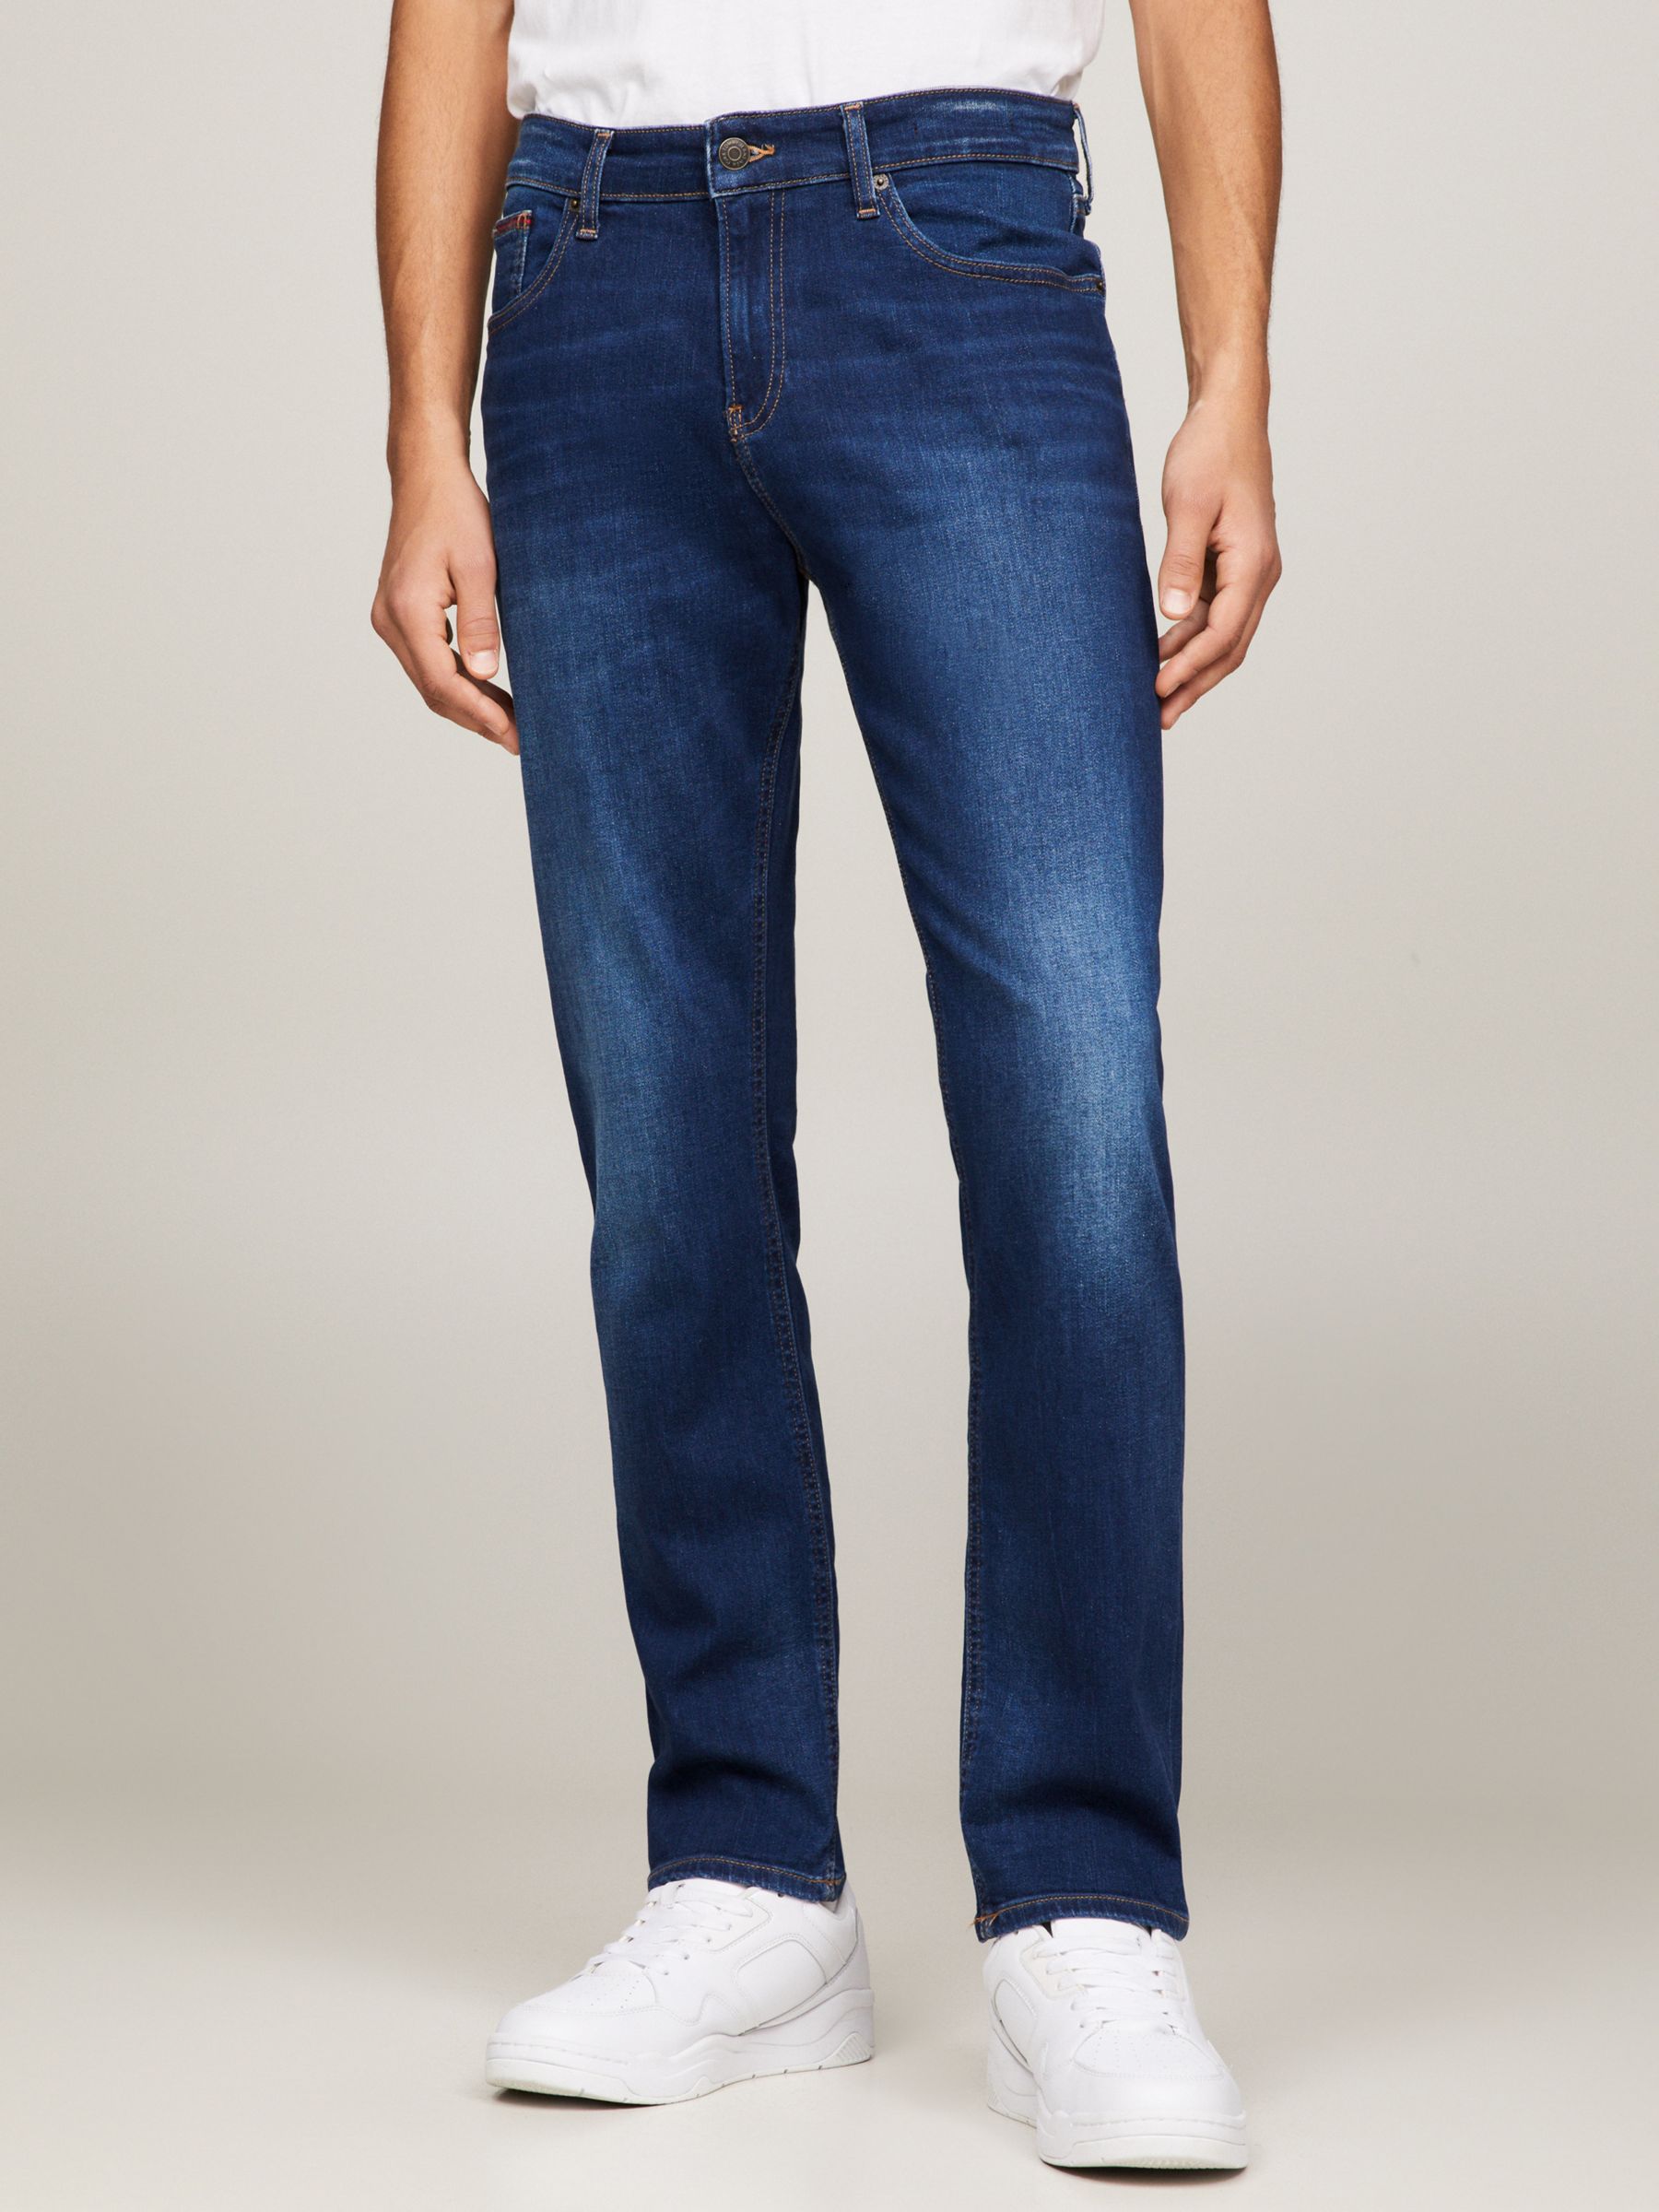 Jeans Relaxed Straight Jeans, Aspen Dark Blue Stretch at John Lewis Partners